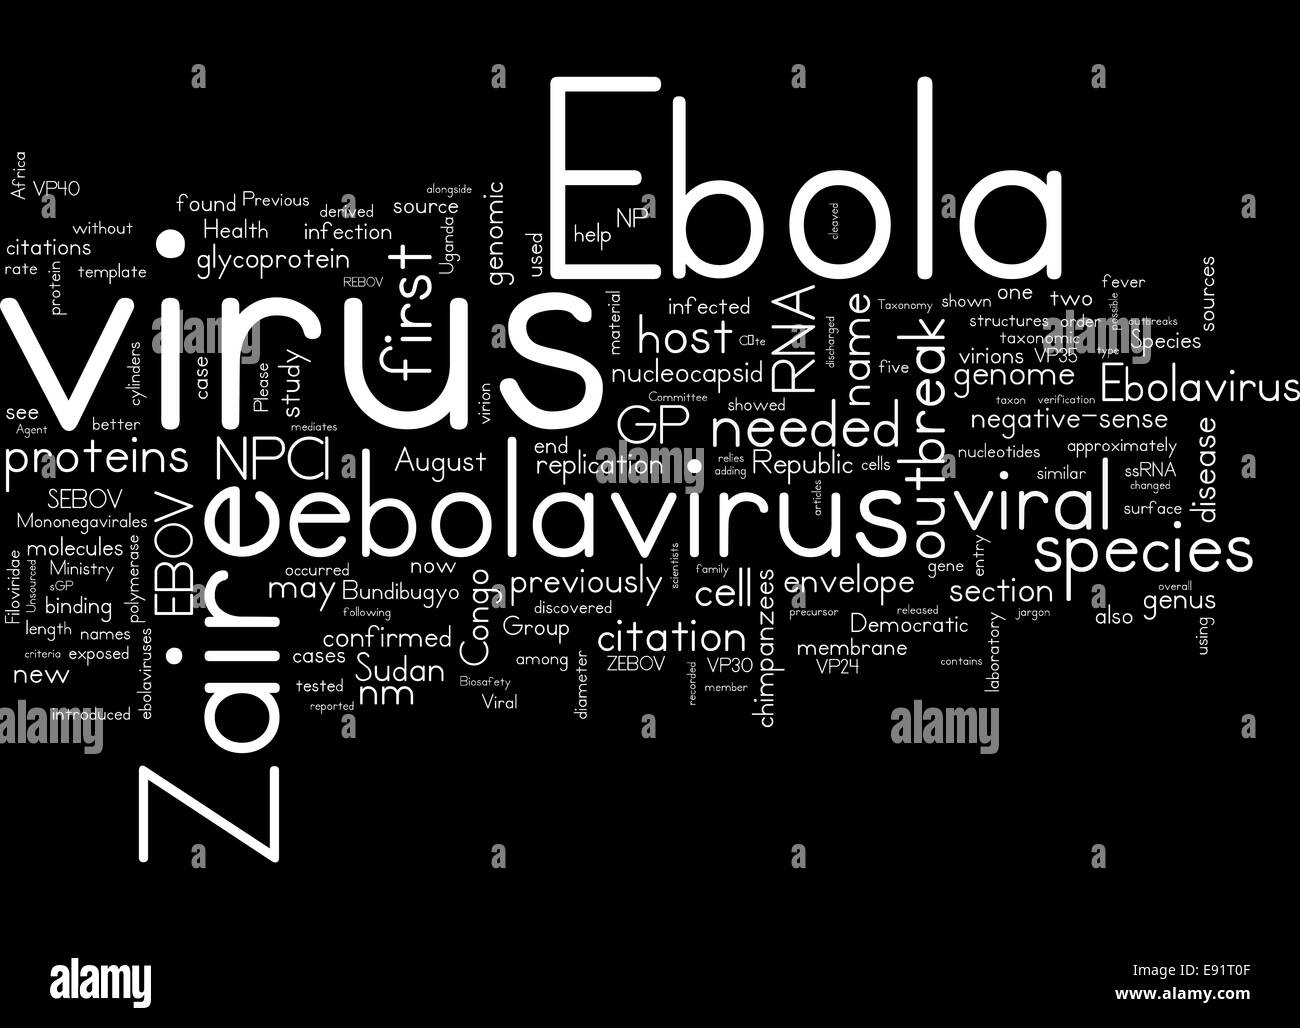 Ebola virus related concepts Stock Photo